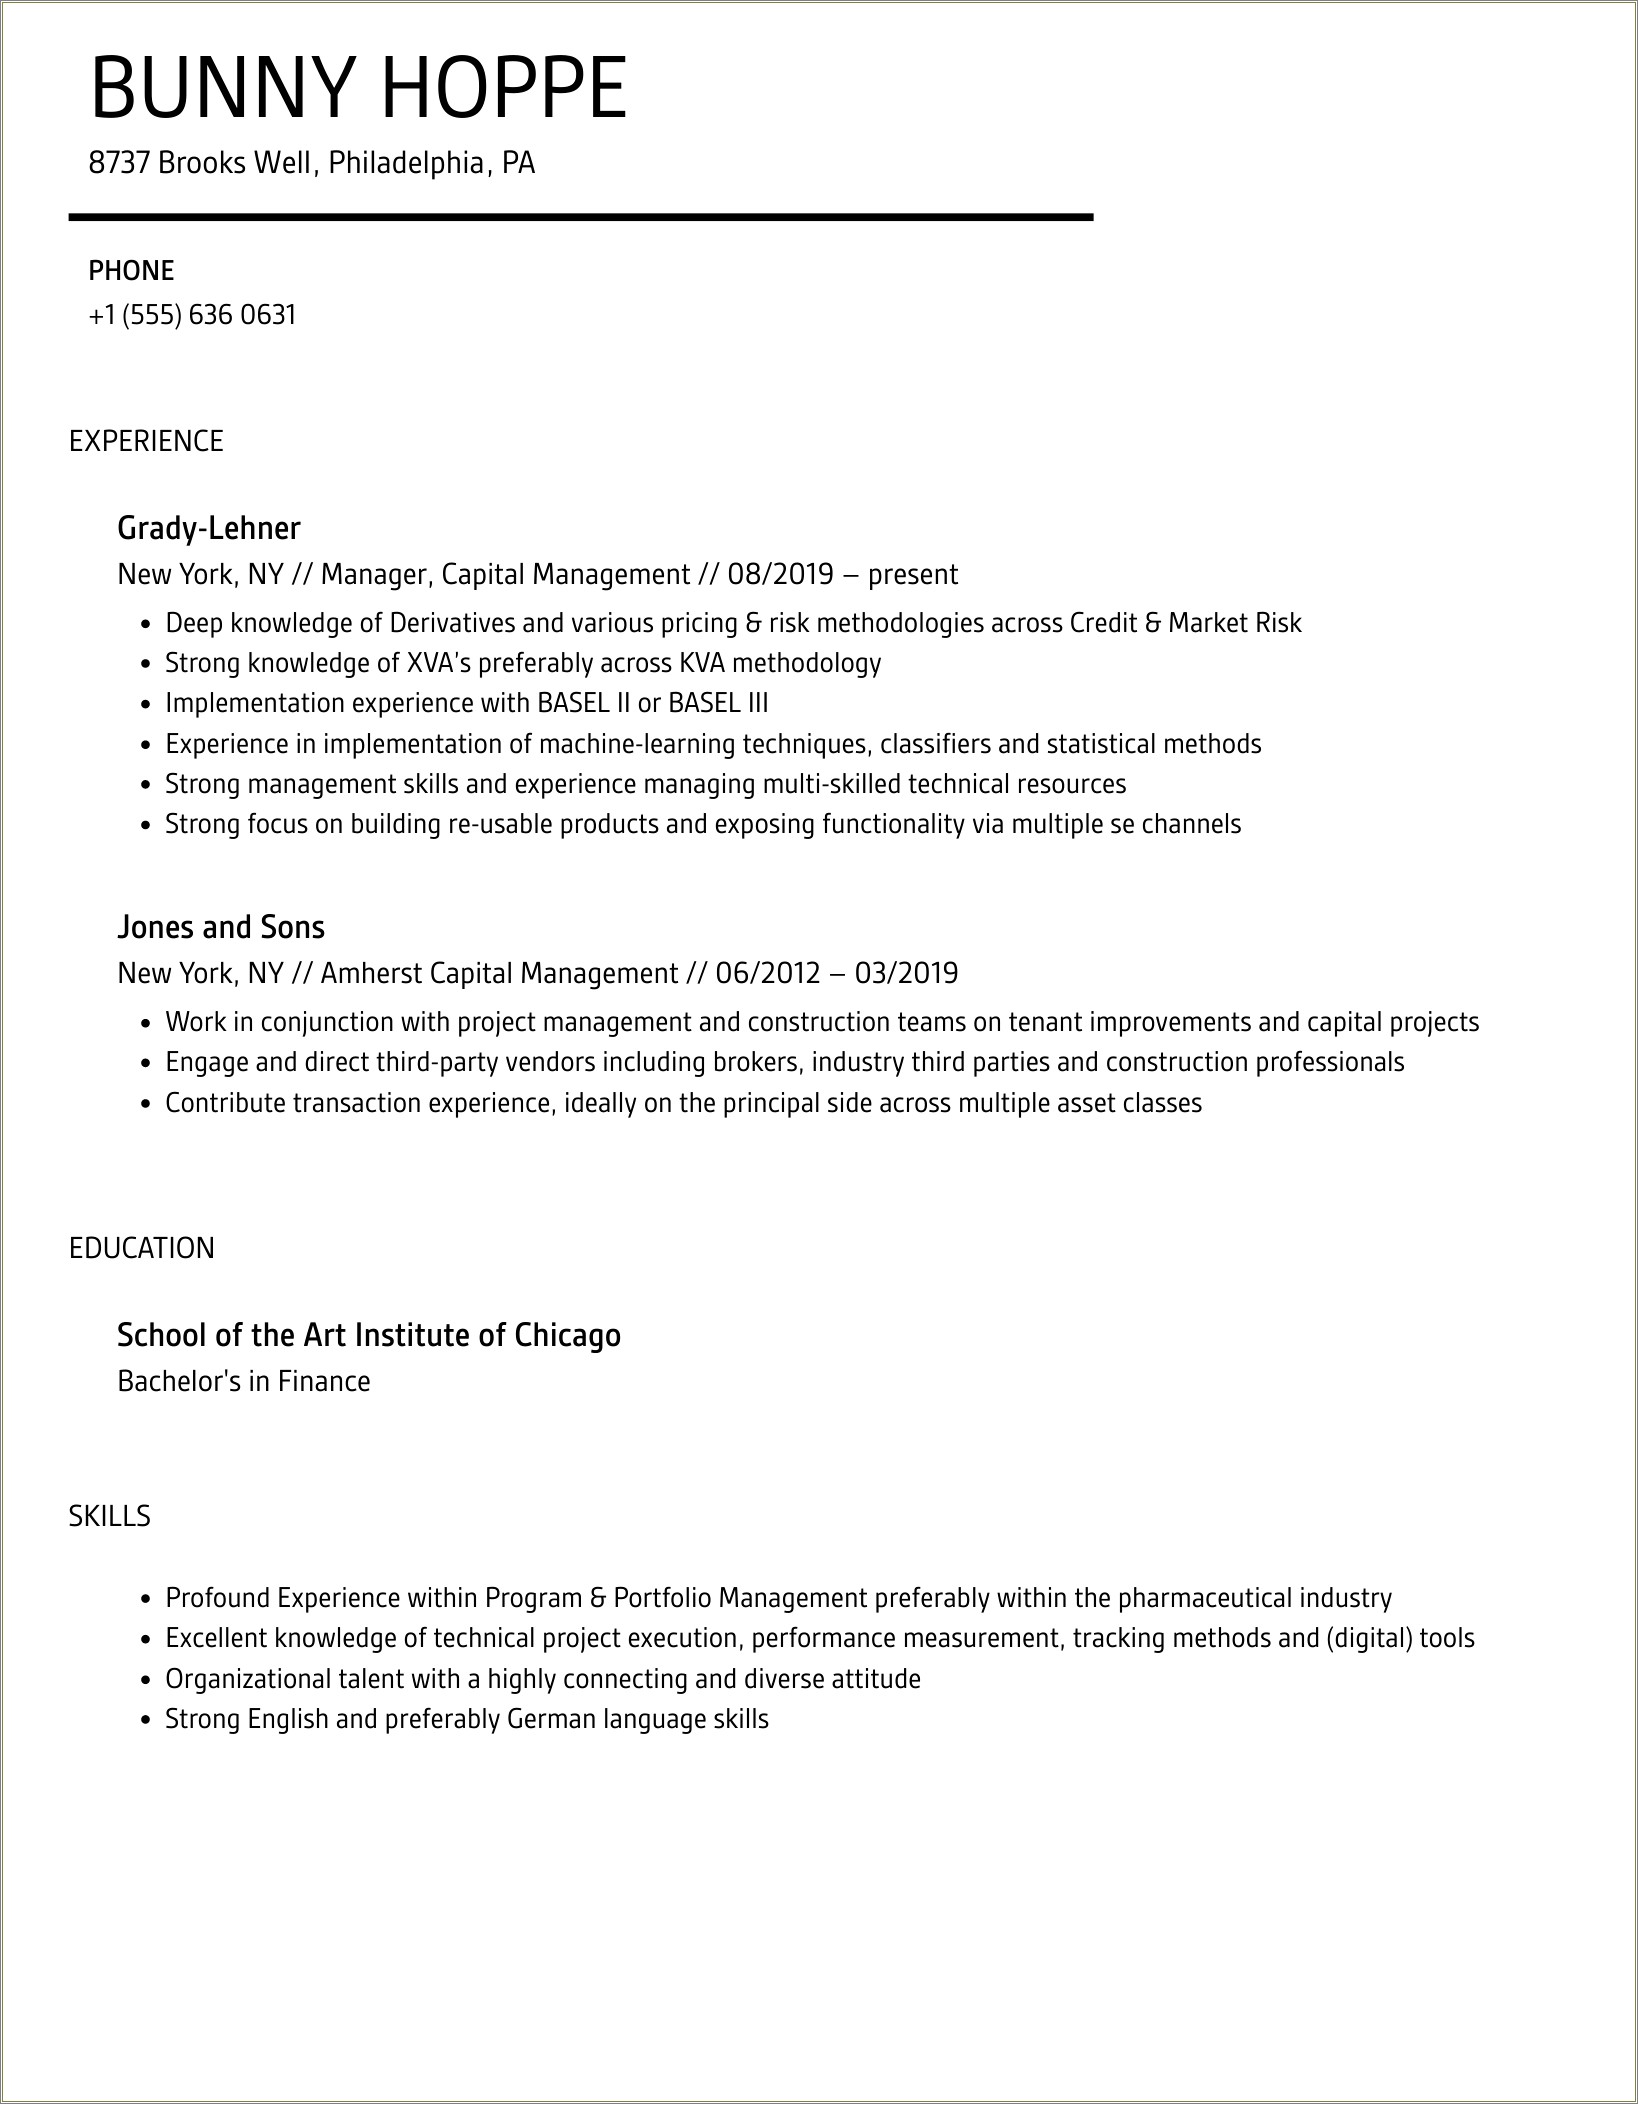 Working Capital Management Project Description In Resume